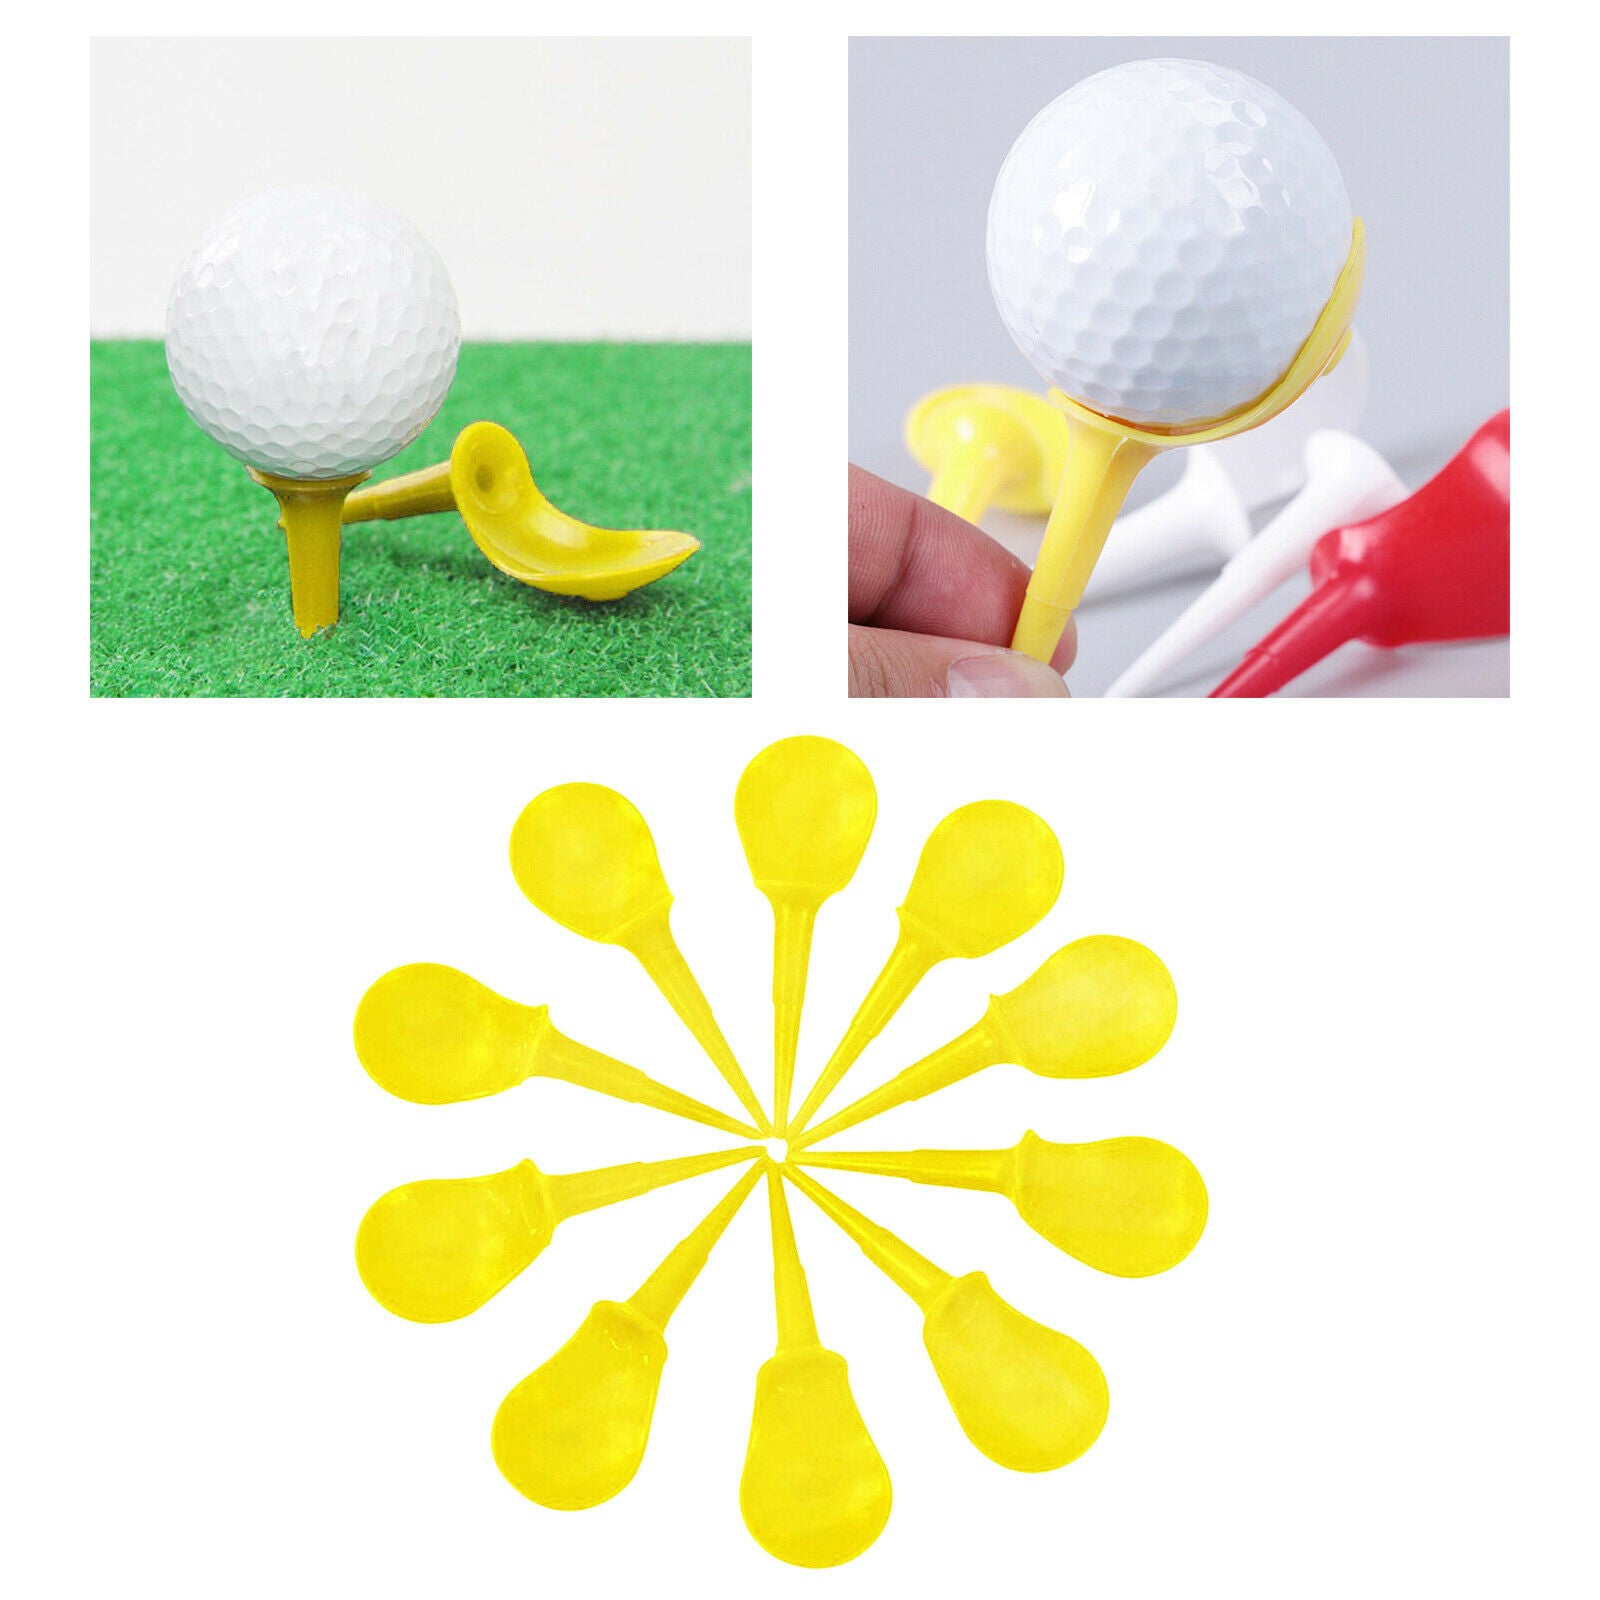 Pack of 10 Plastic Golf Tees Unbreakable Training Aids Beginners Yellow